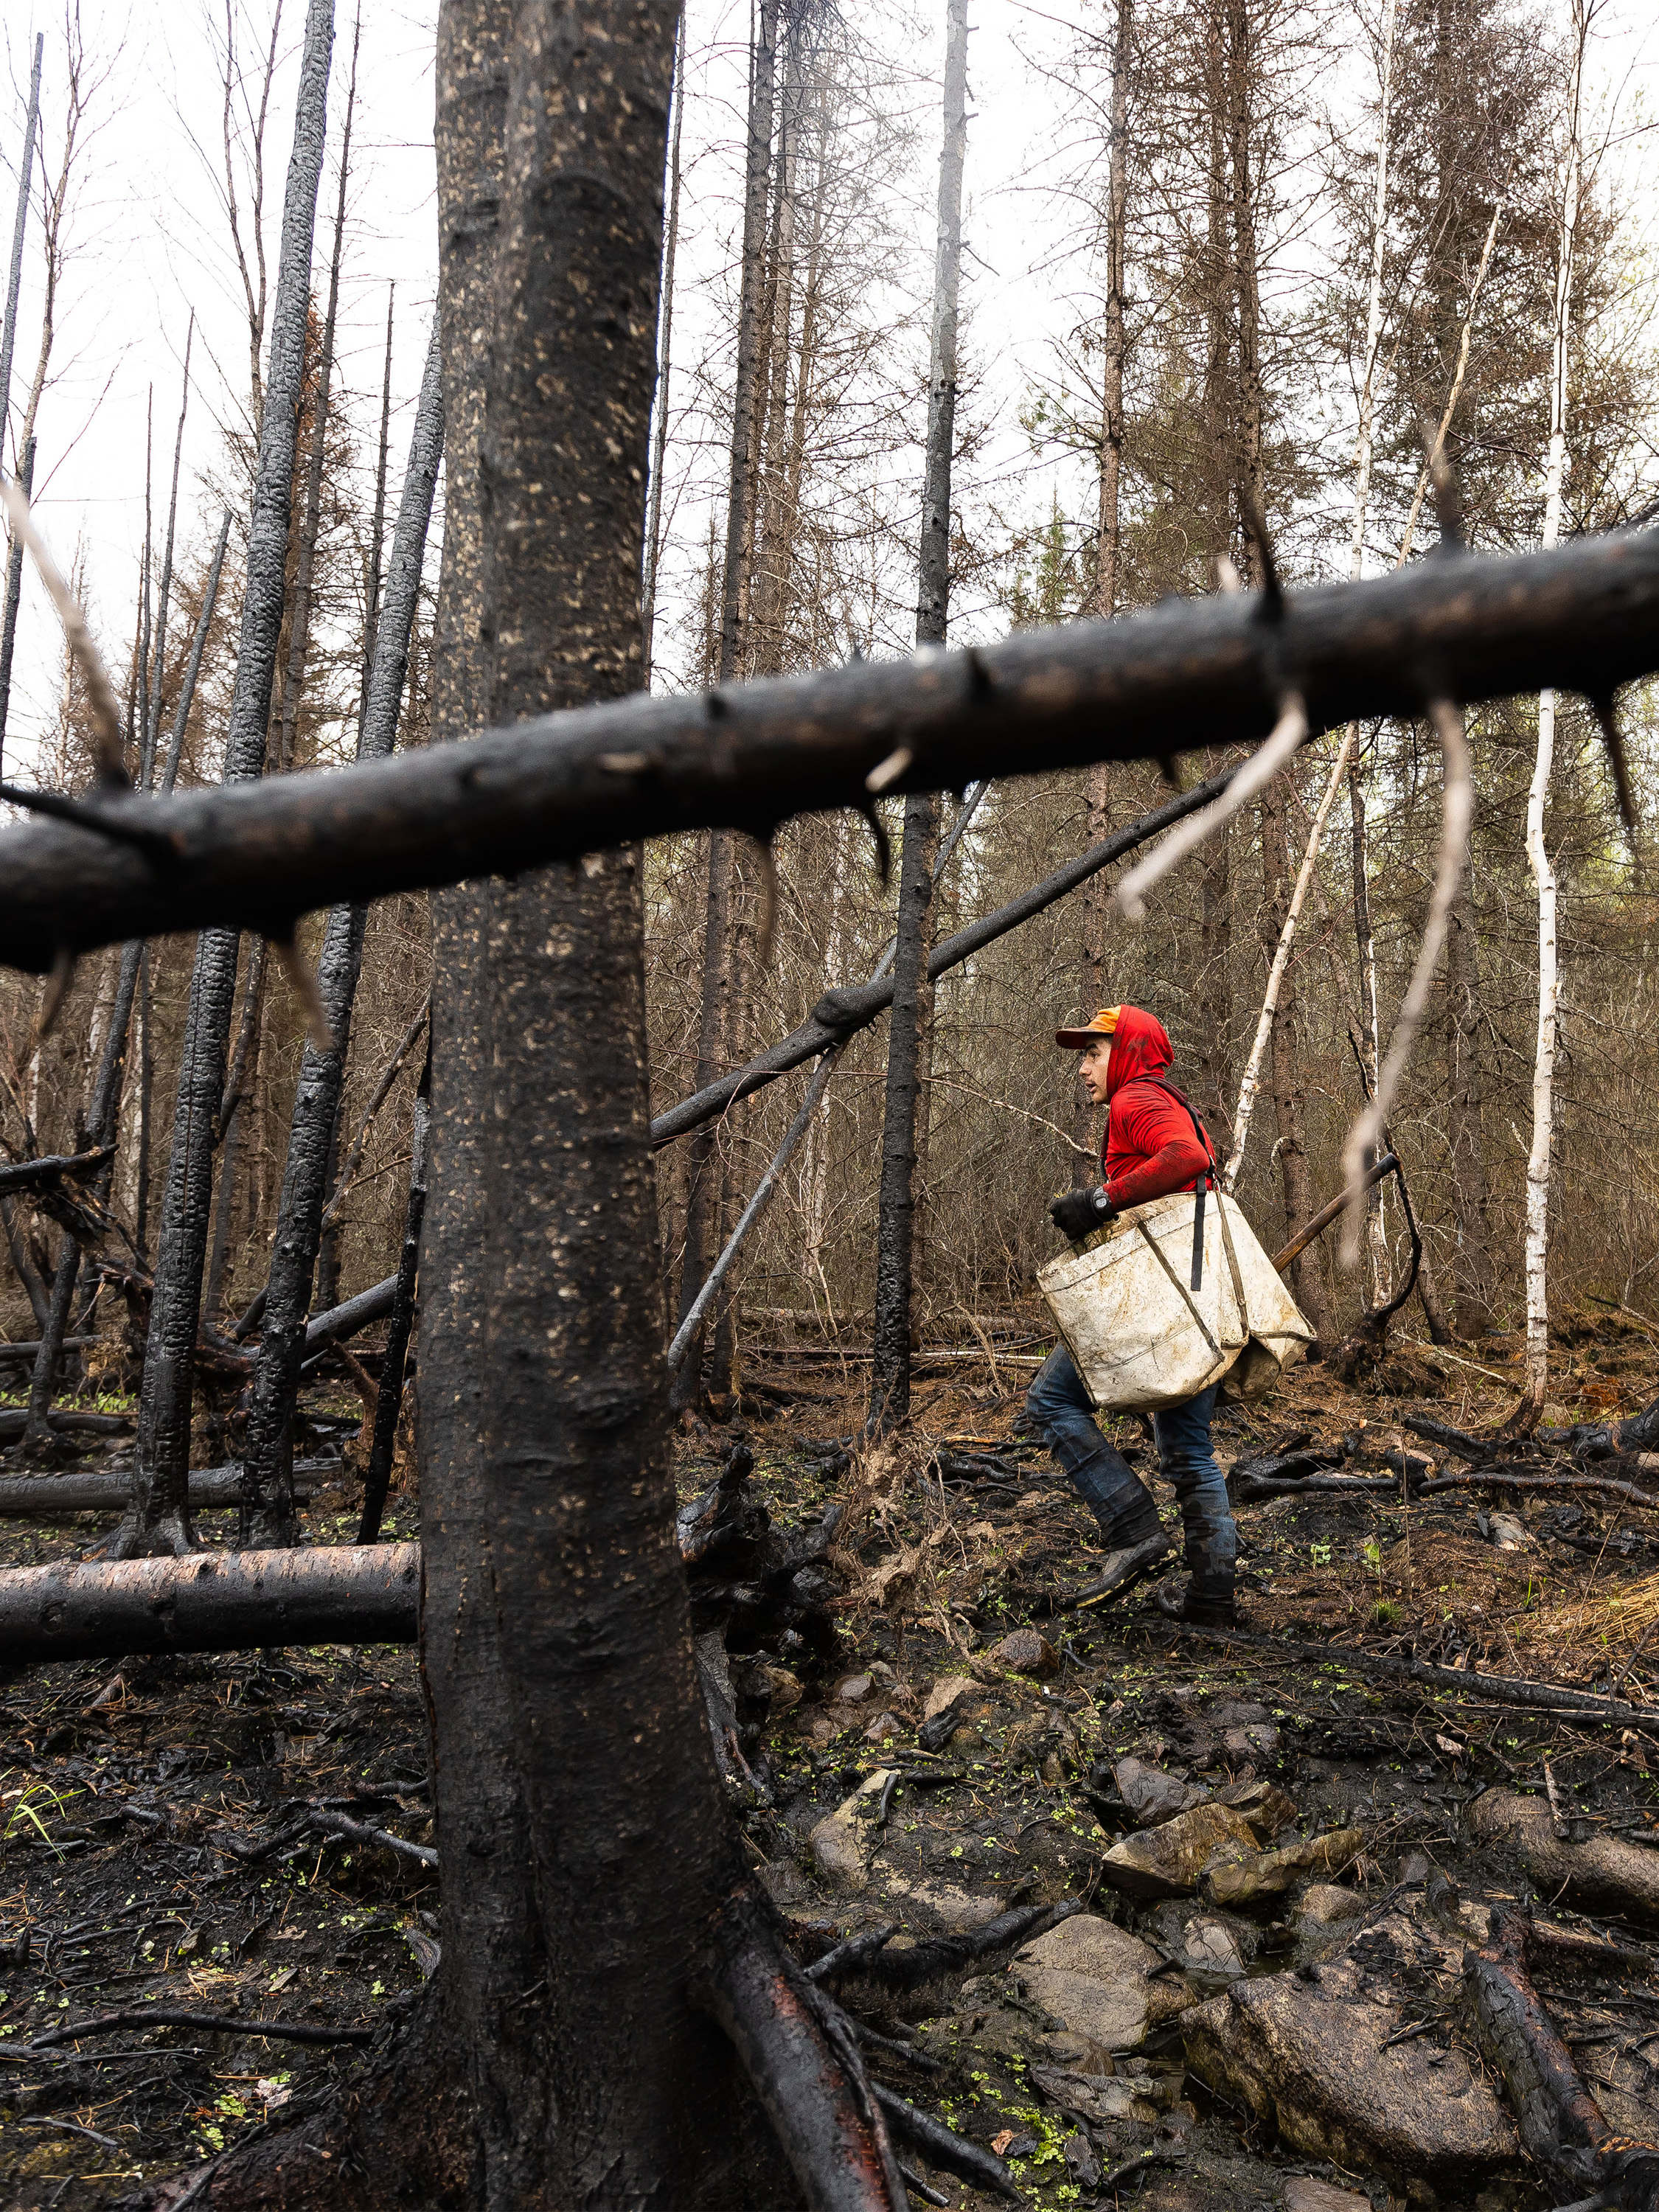 A person walks through the charred remains of a burned forest.